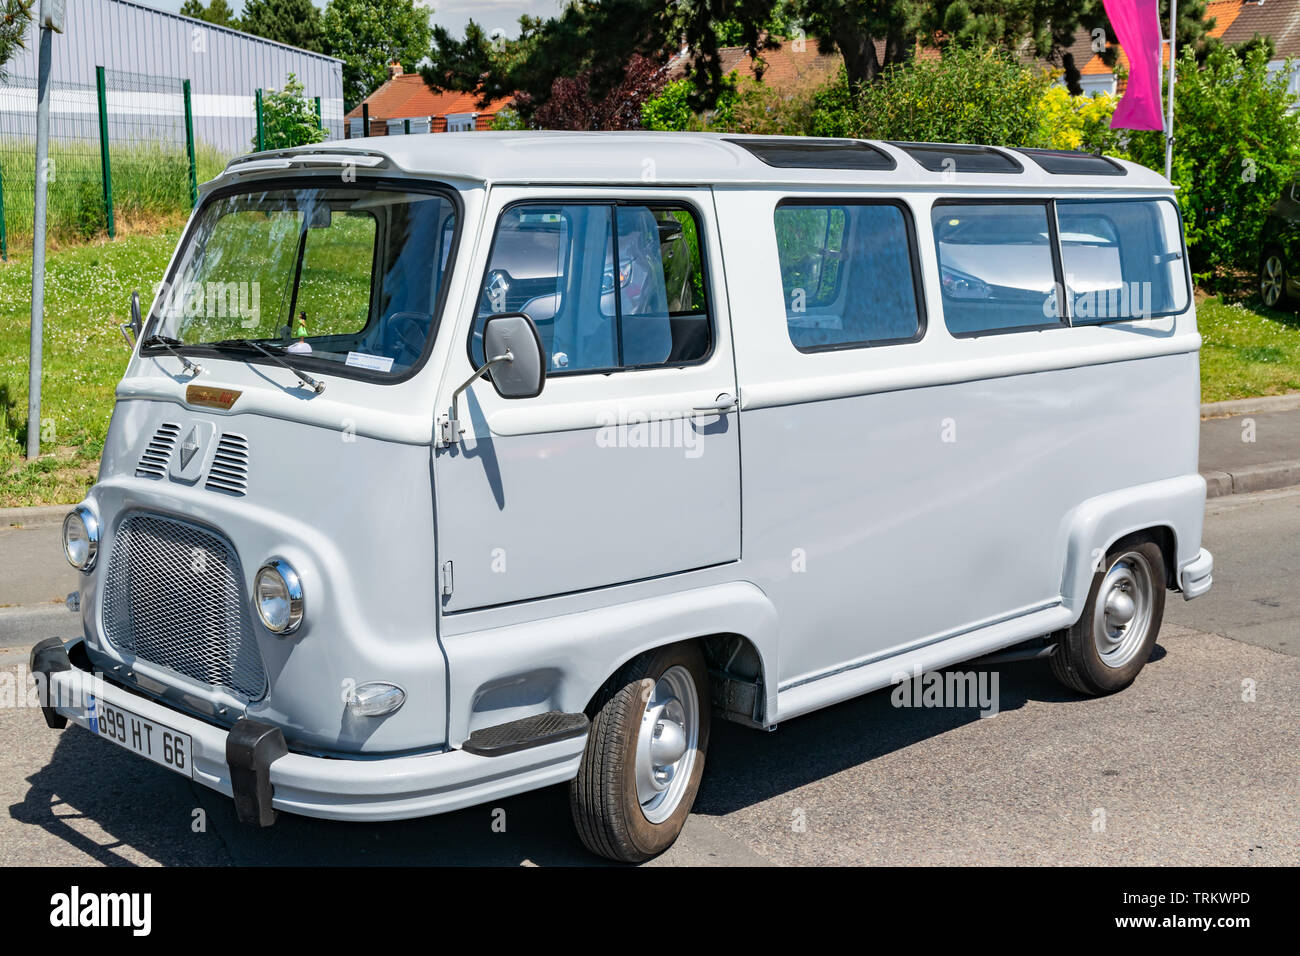 Wattrelos,FRANCE-June 02,2019: view of the old Estafette Renault car,car exhibited at the 7th Retro Car Festival at the Renault Wattrelos ZI Martinoir. Stock Photo